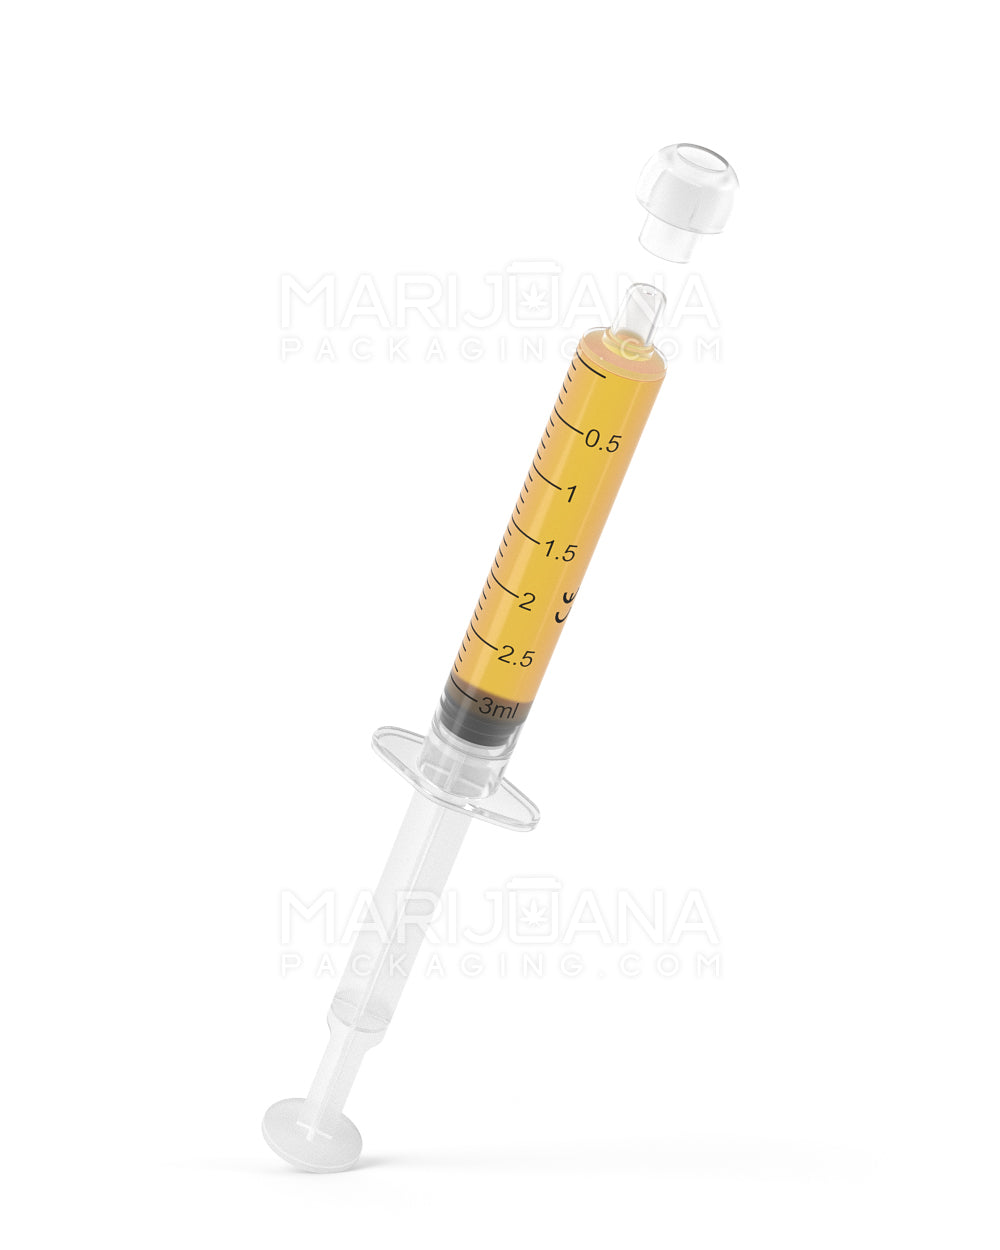 1mL Plastic Oral Concentrate Syringes with 0.1mL Increments